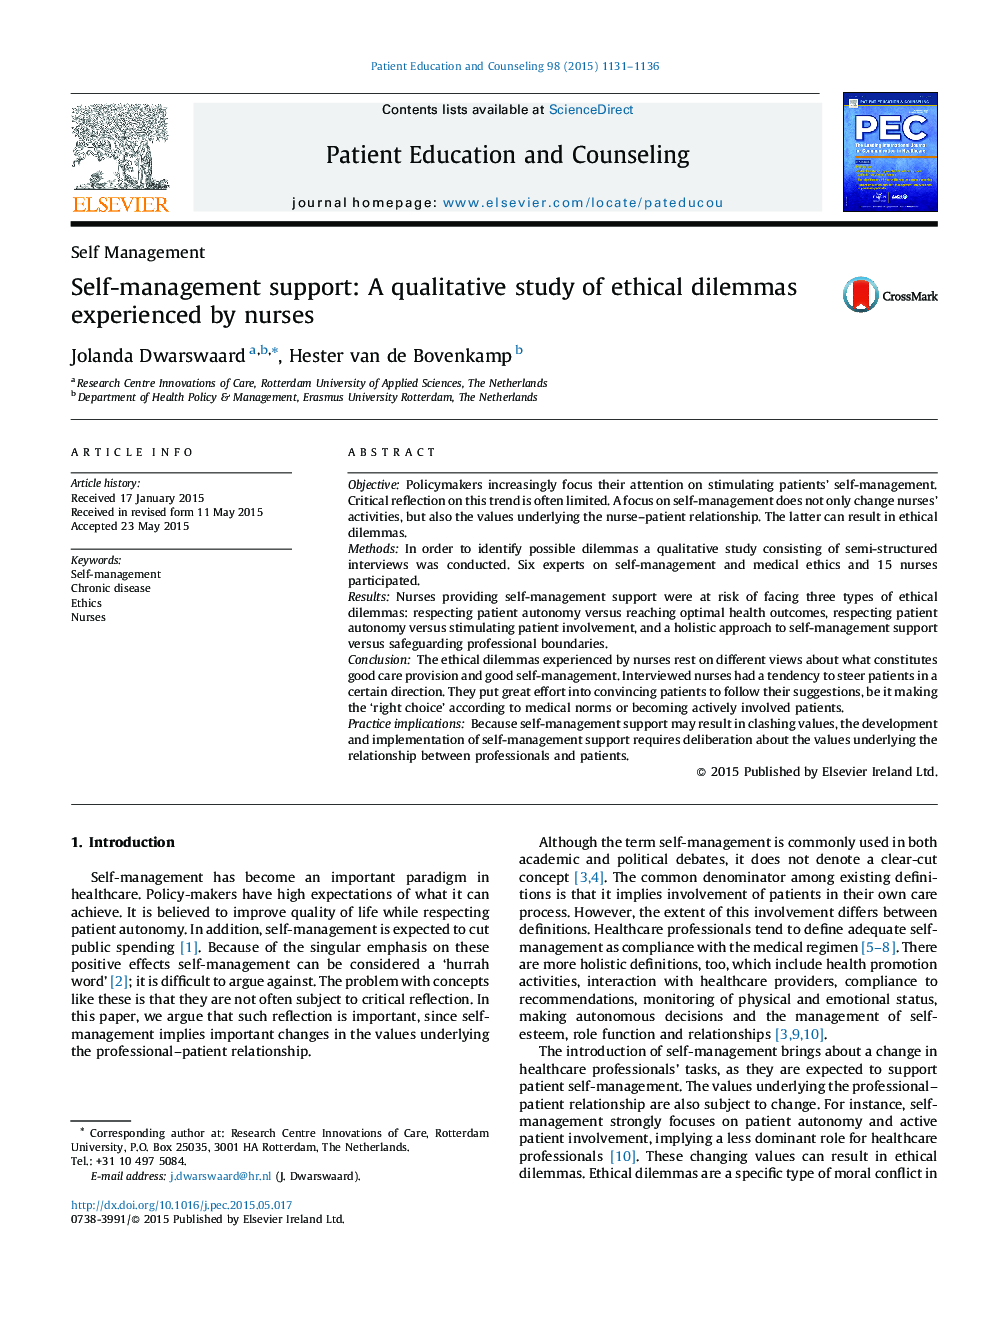 Self-management support: A qualitative study of ethical dilemmas experienced by nurses